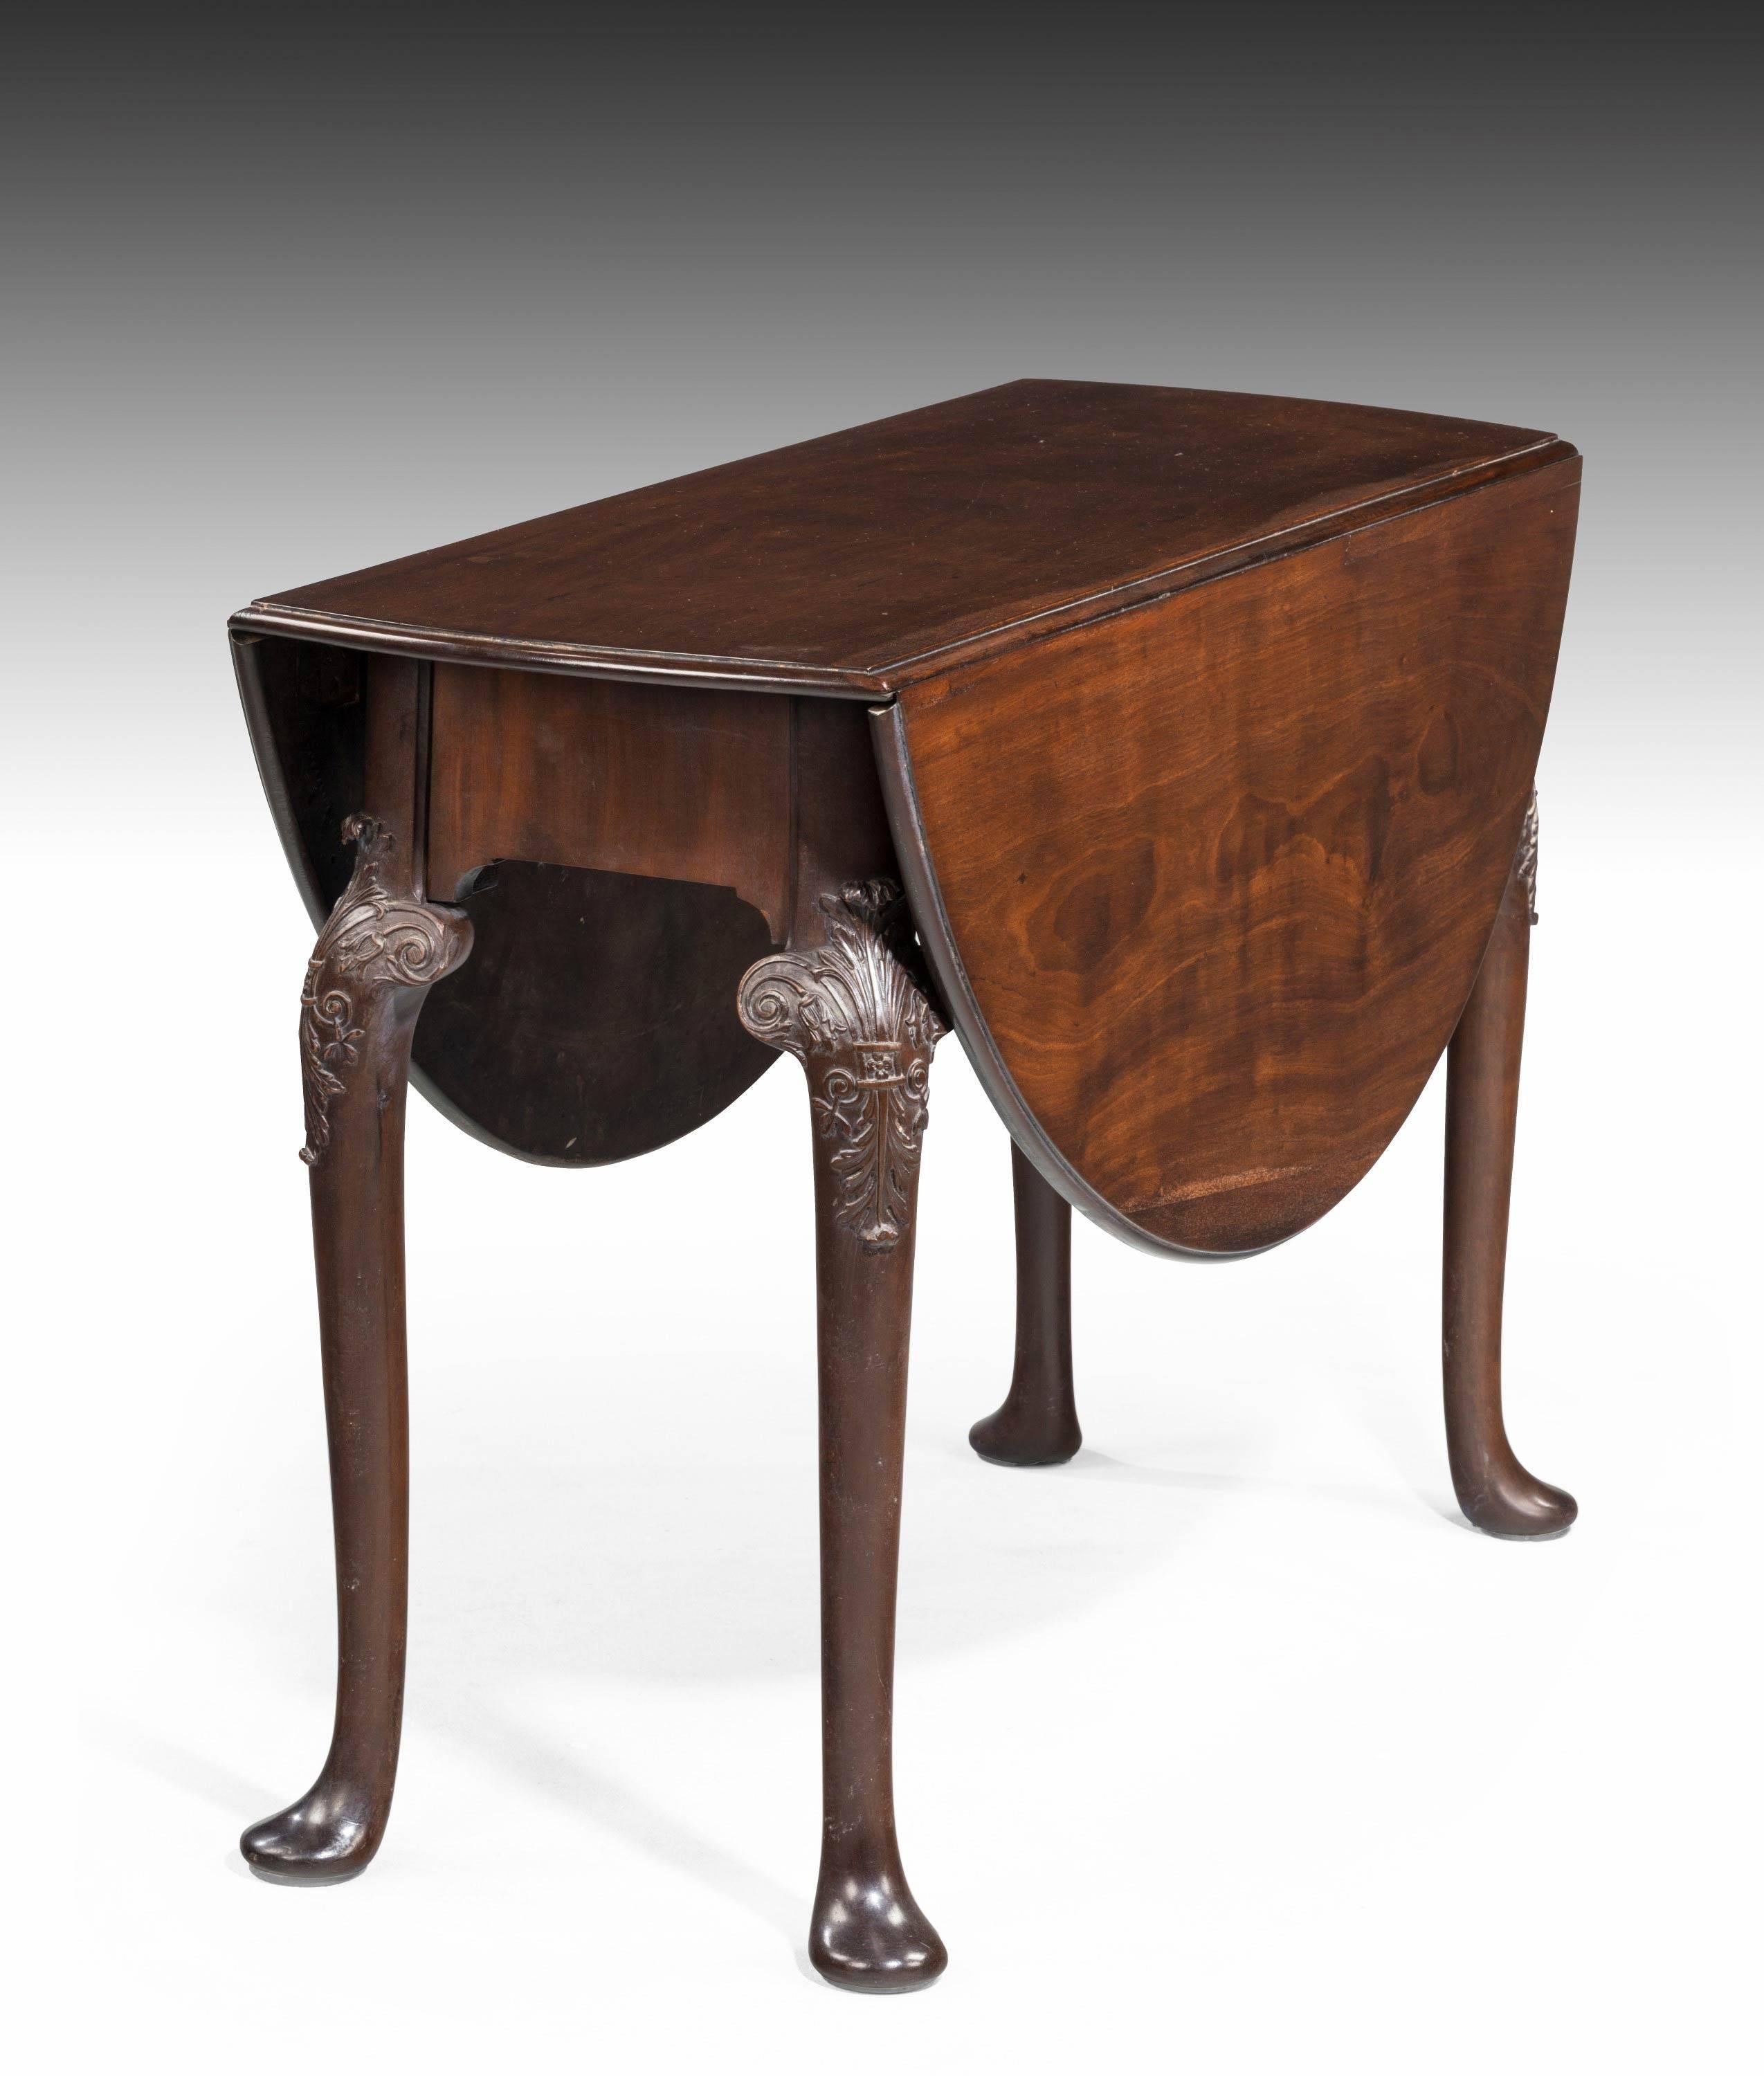 A very good mid-18th century mahogany oval drop leaf table. The knees beautifully carved over gentle cabriole supports ending in pad feet. Excellent original overall condition. Possibly Irish. 

Measures: When open 48.25 x 40.25 inches.